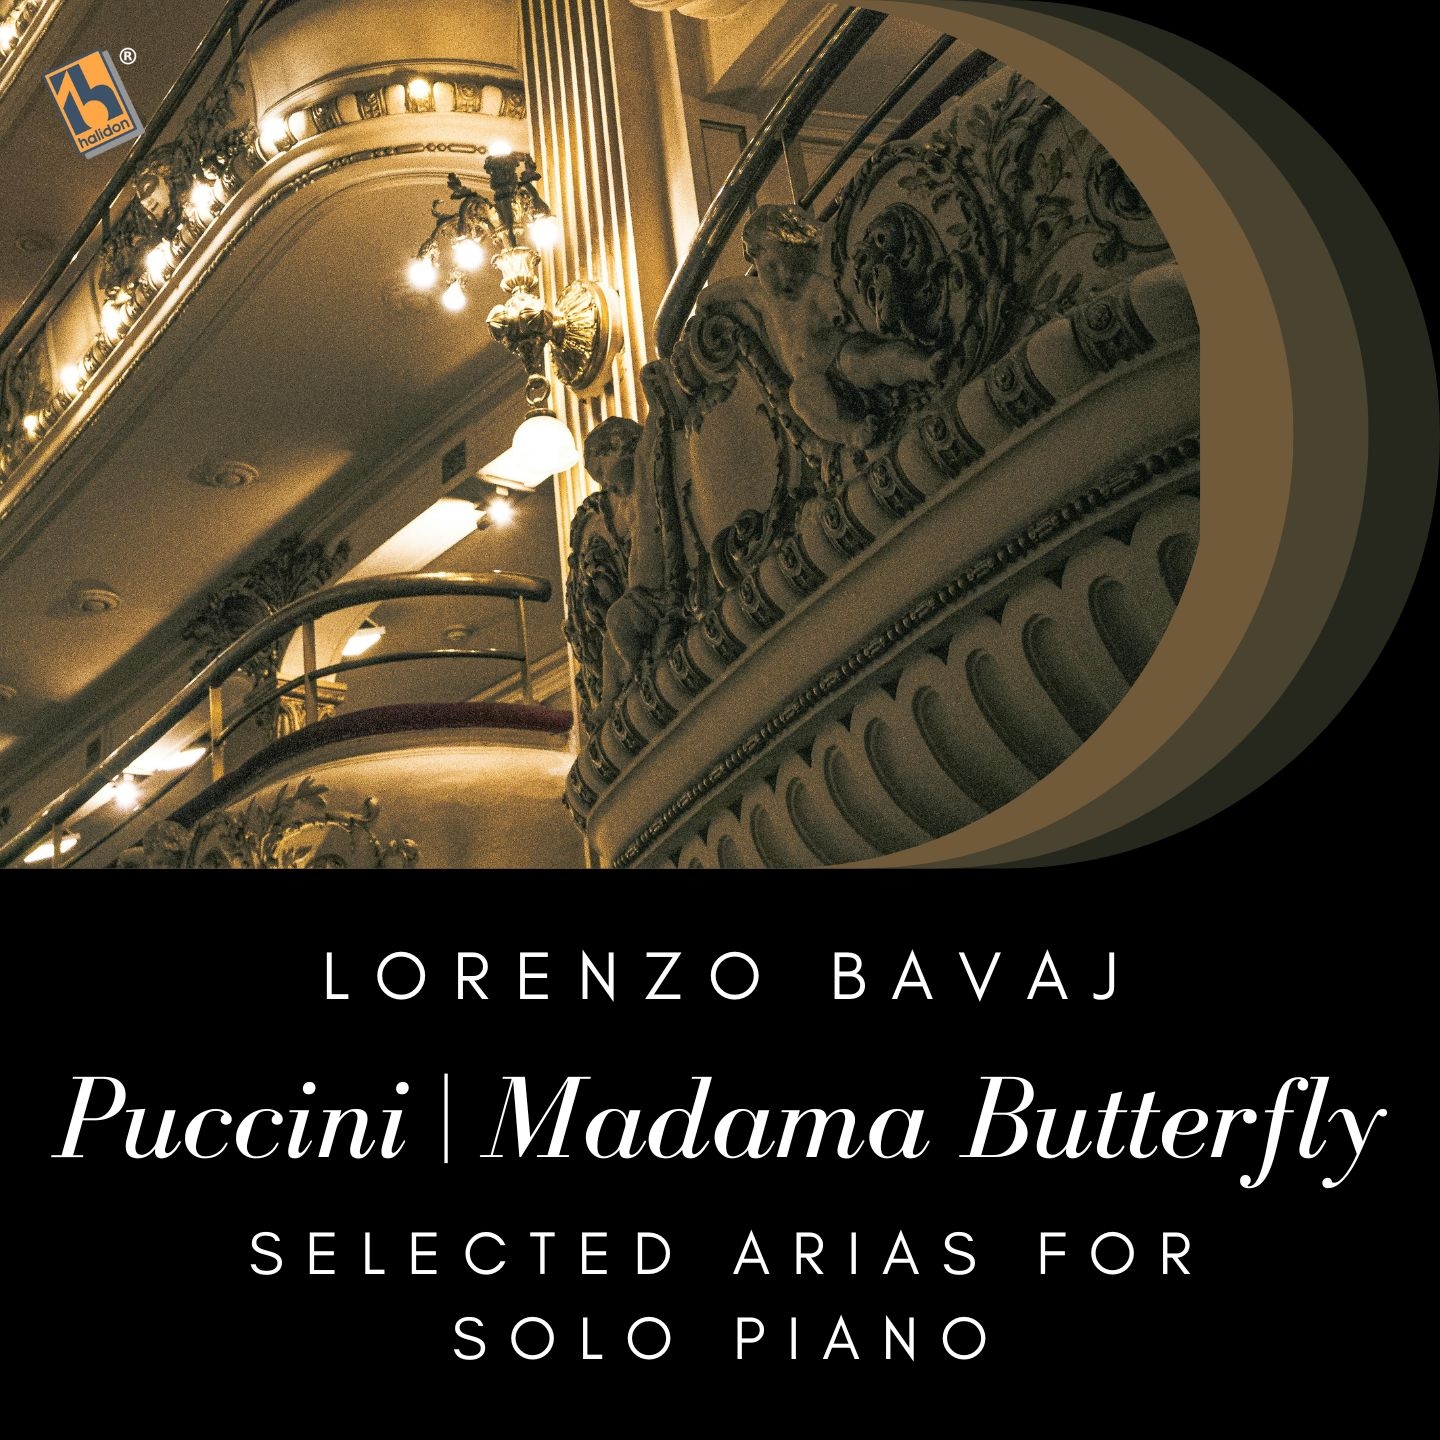 Puccini: Madama Butterfly (Selected Arias for Solo Piano)